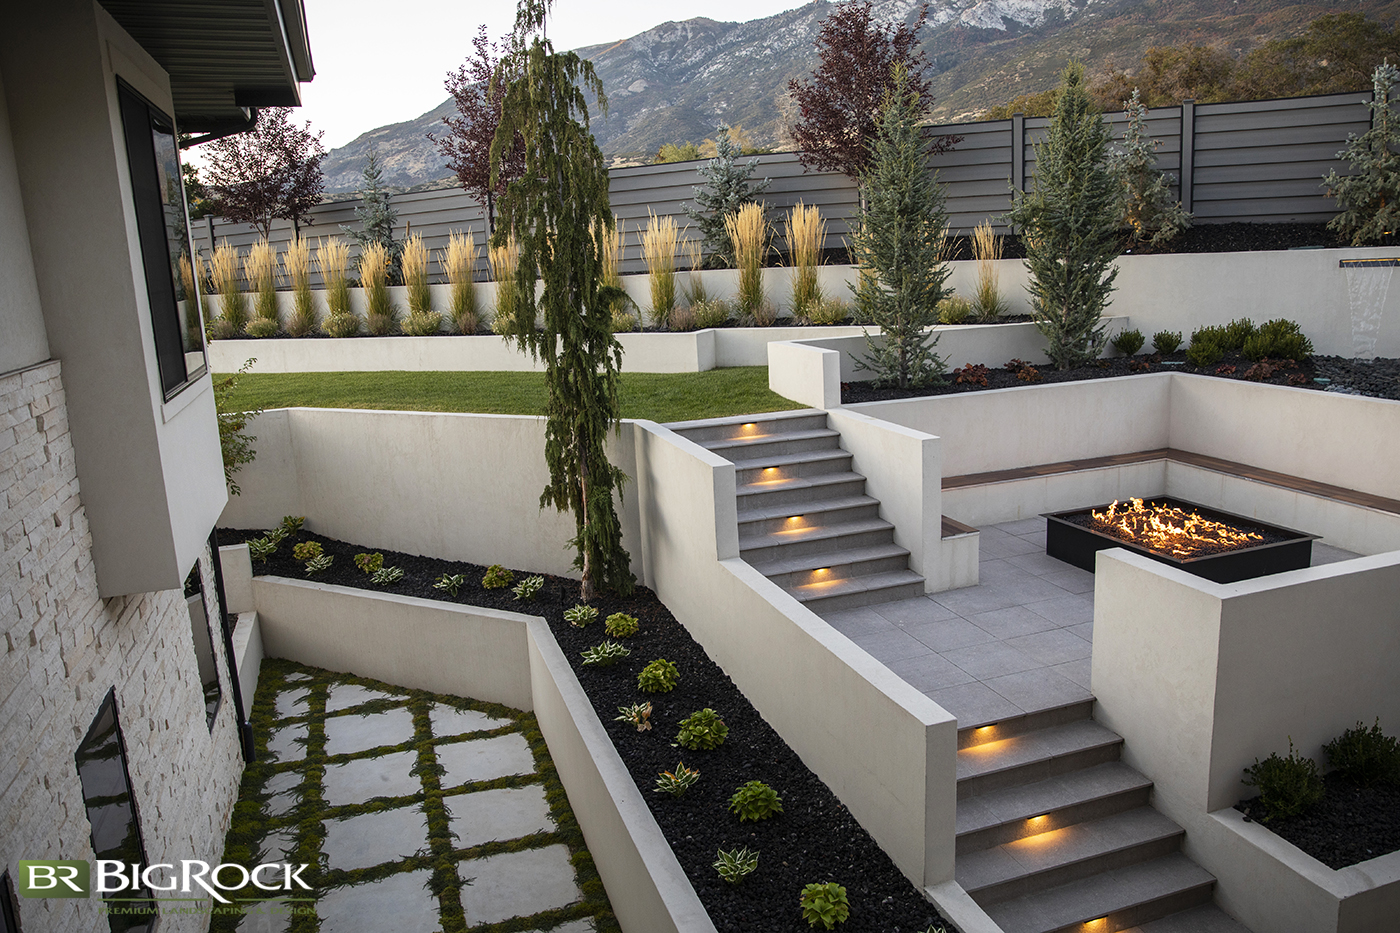 Truly it’s the details that separate the good from the great, the typical backyard from the luxury landscaping.